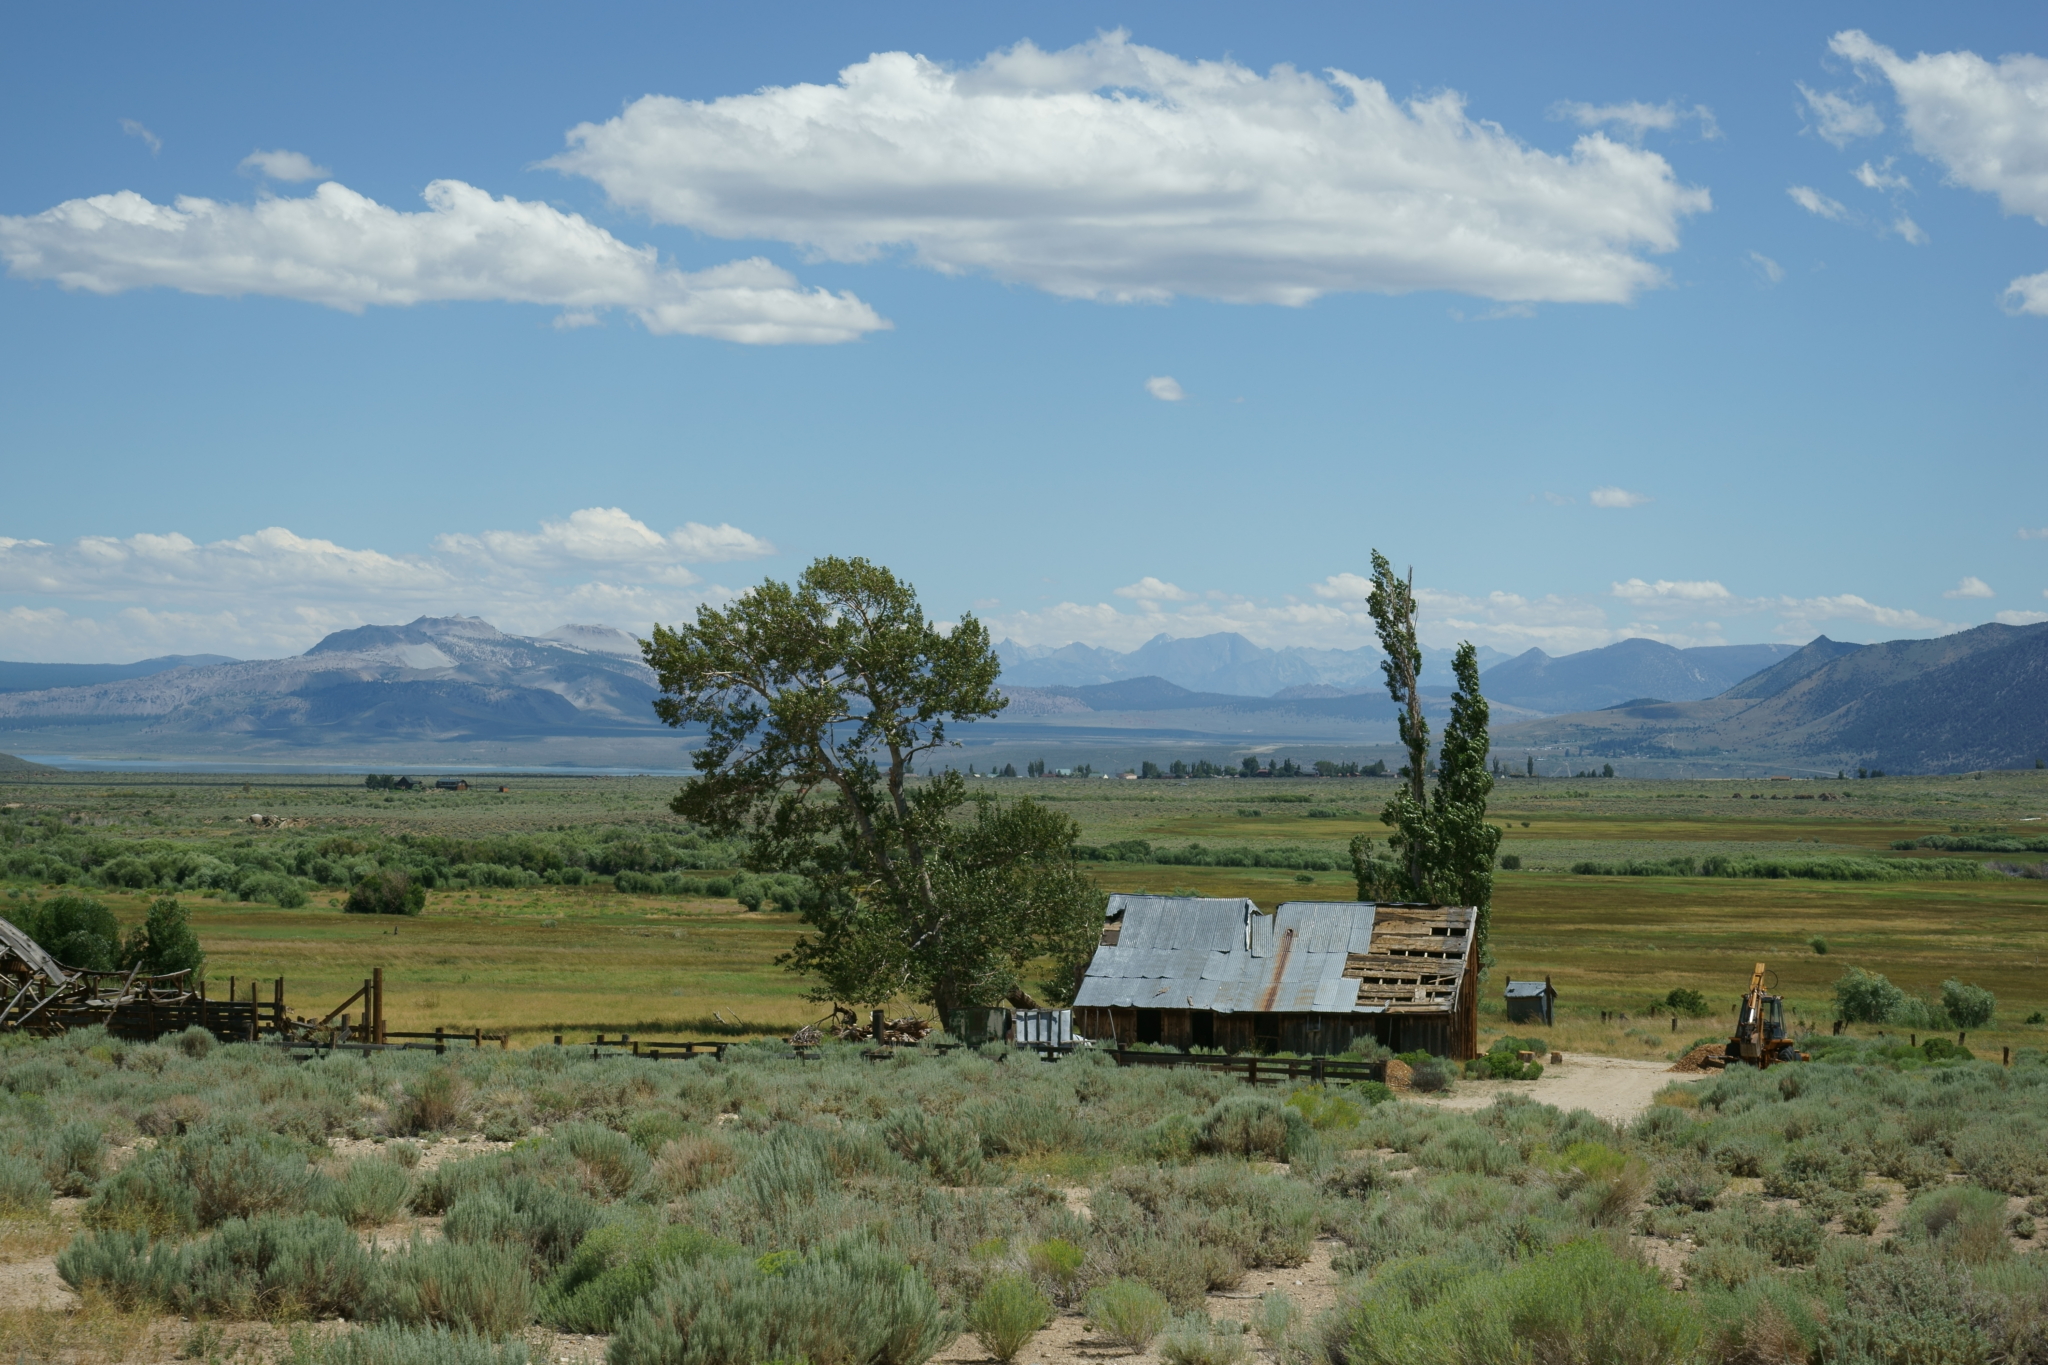 "Standing at Conway Ranch, looking across the vast sweep of the land down to Mono Lake and up to the Sierra, I realized how extraordinary the work of ESLT truly is. Conserving this land was a spectacular achievement, born of months of patient effort." ~Ruth MacFarlane, ESLT supporter. Photo © Bill Dunlap